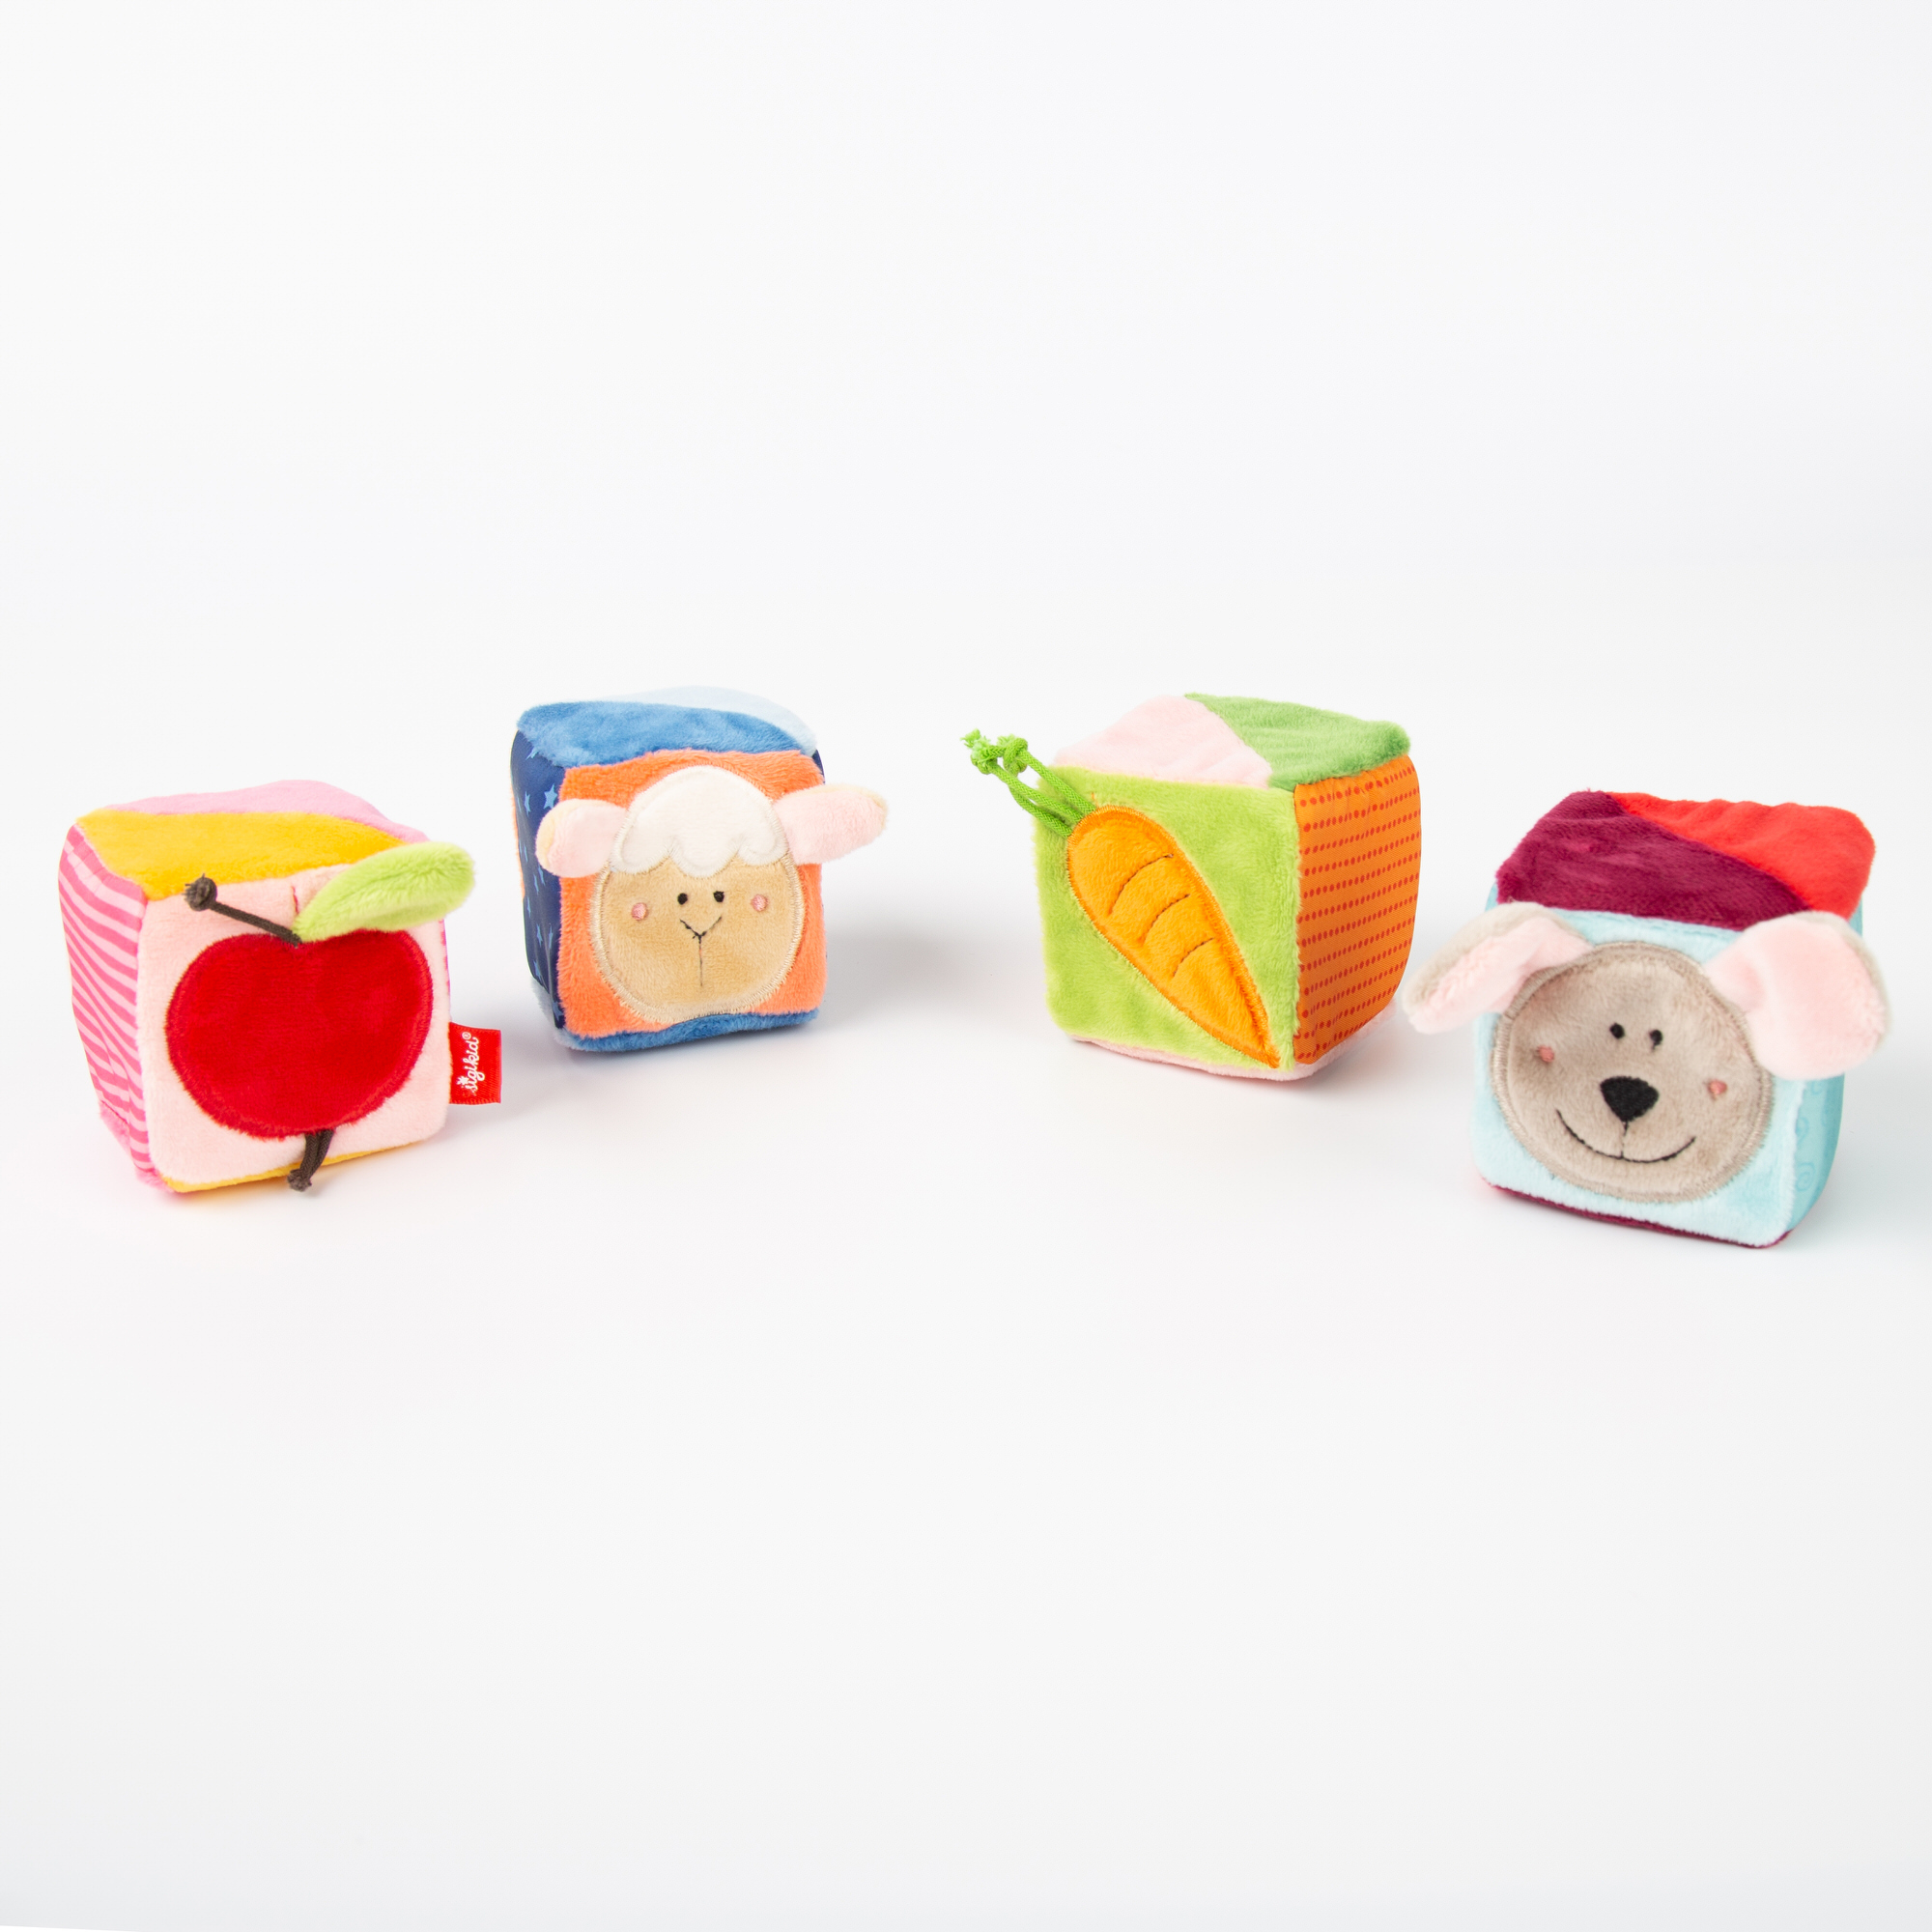 Rattle squeaker soft toy cube dice set